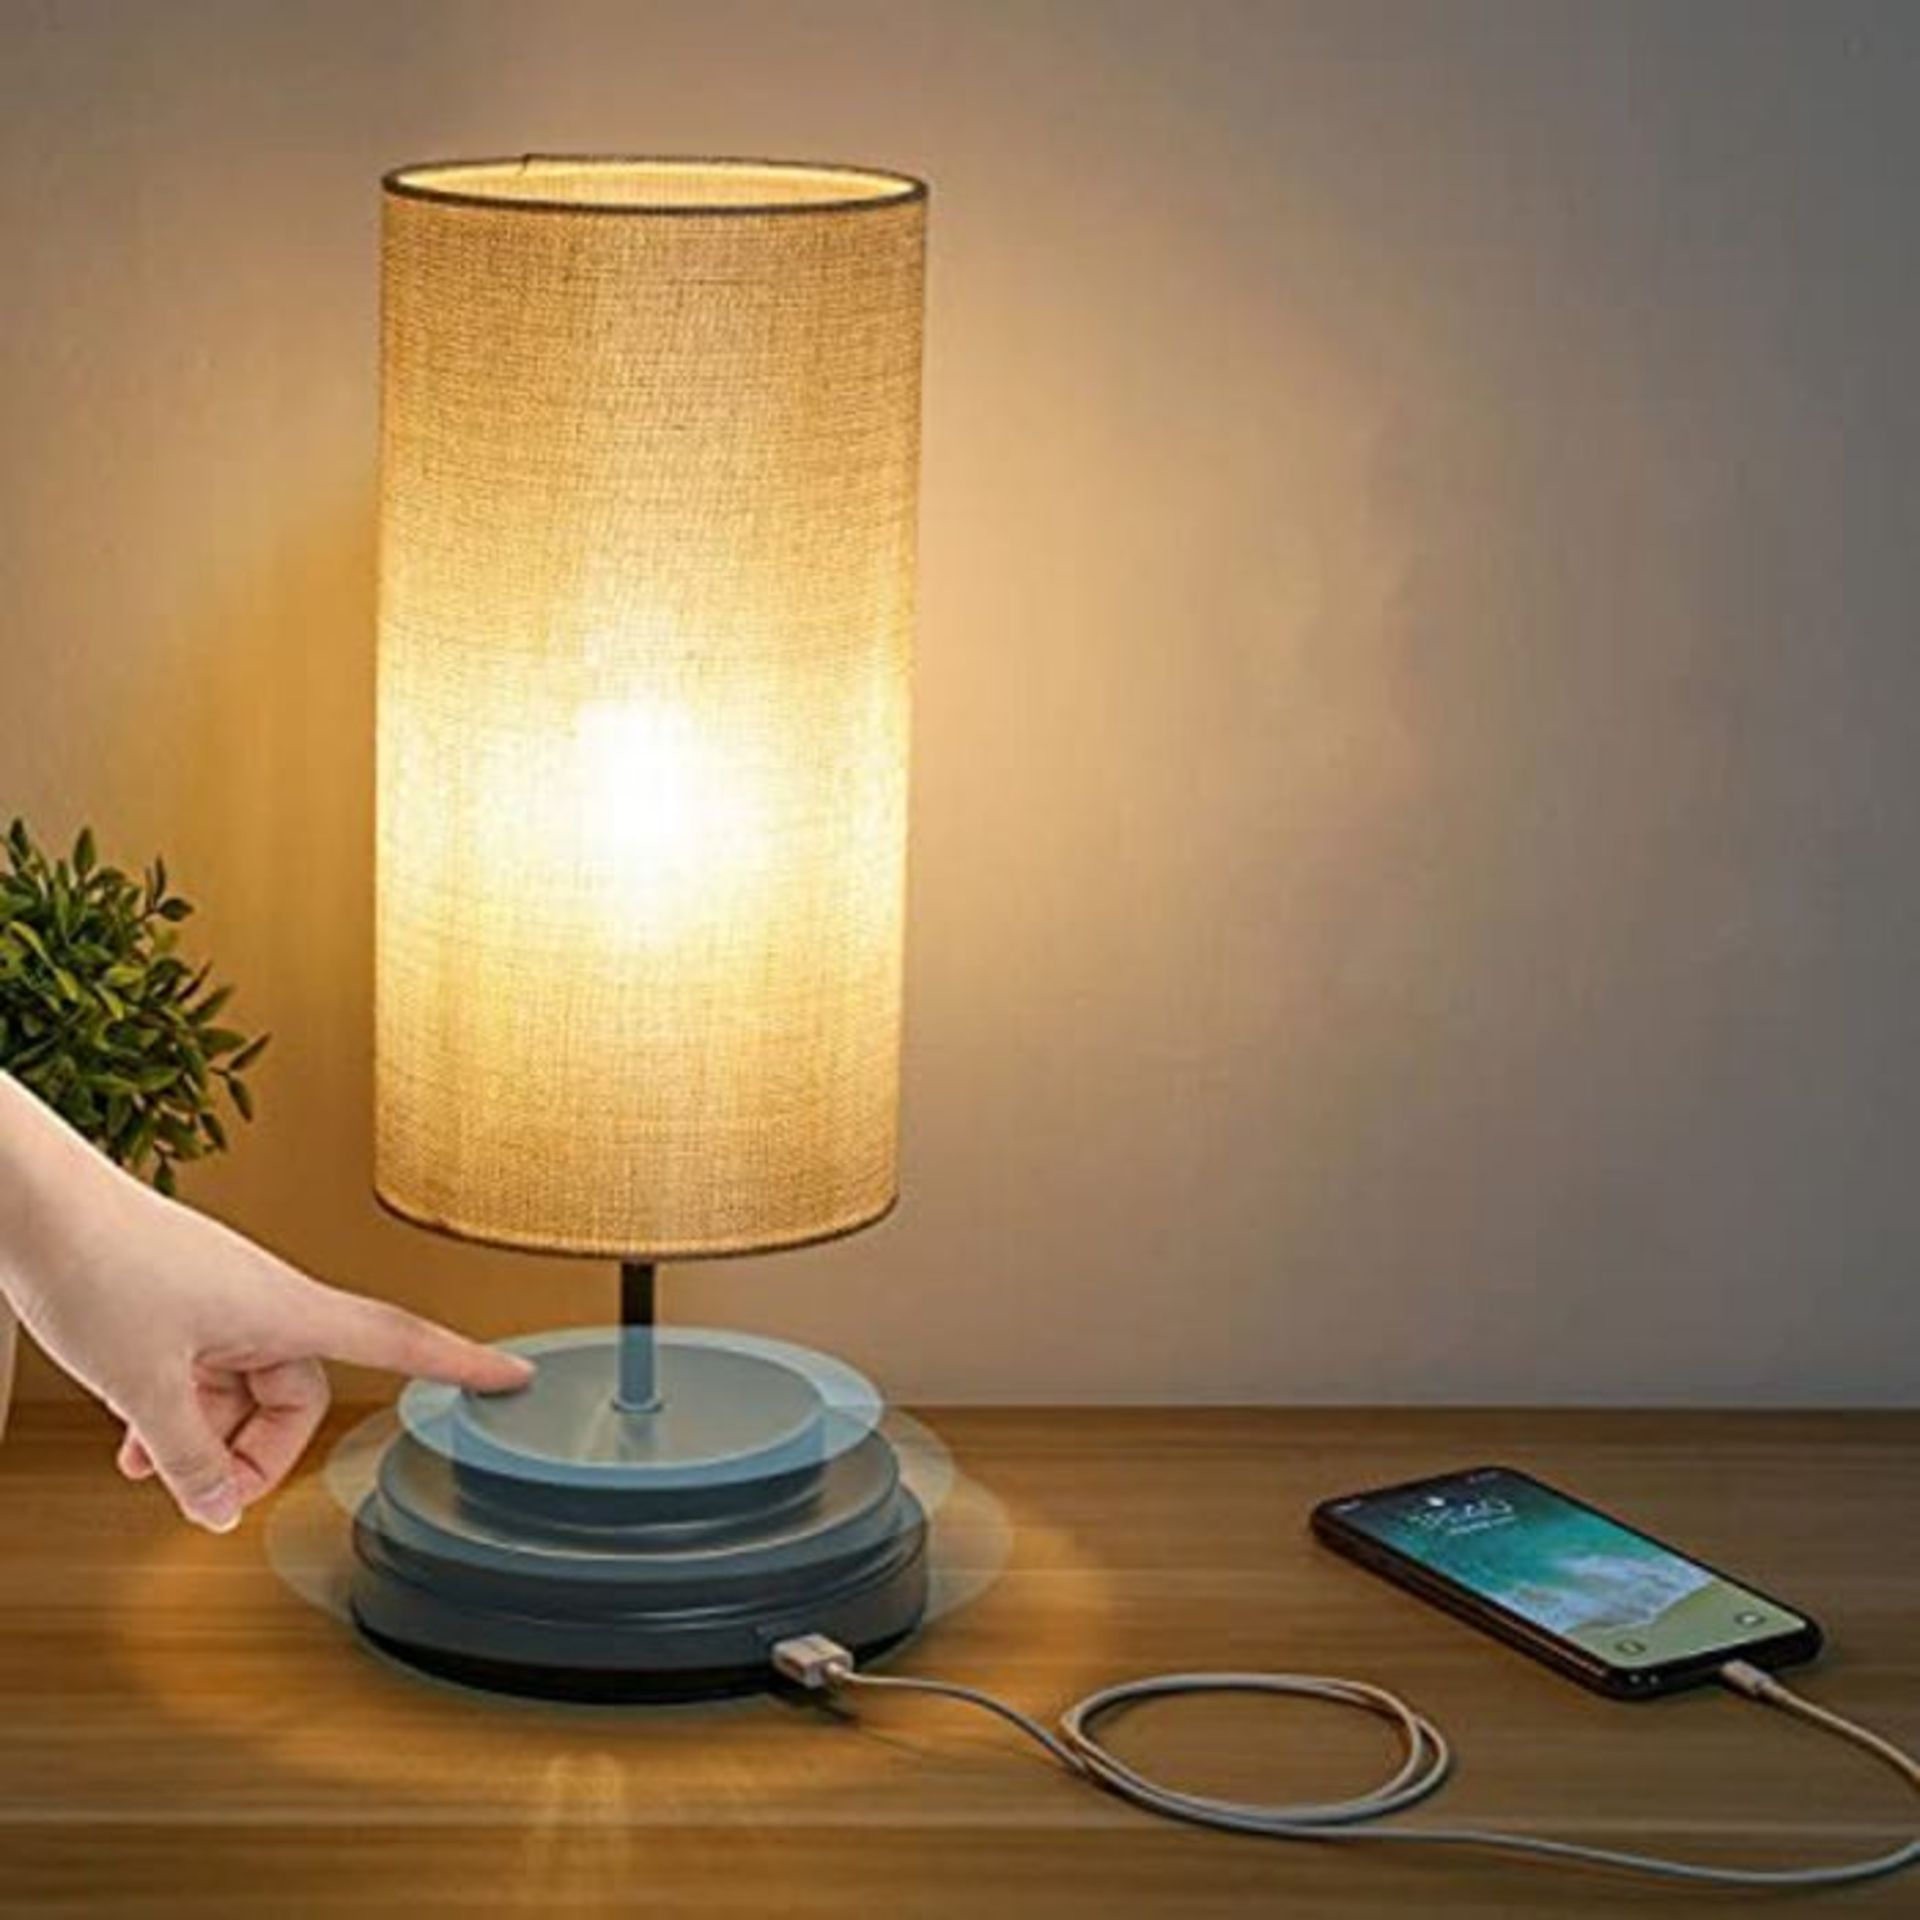 Kohree Bedside Table Lamp Dimmable Touch Control, LED Modern Bedside Lamp with USB Por